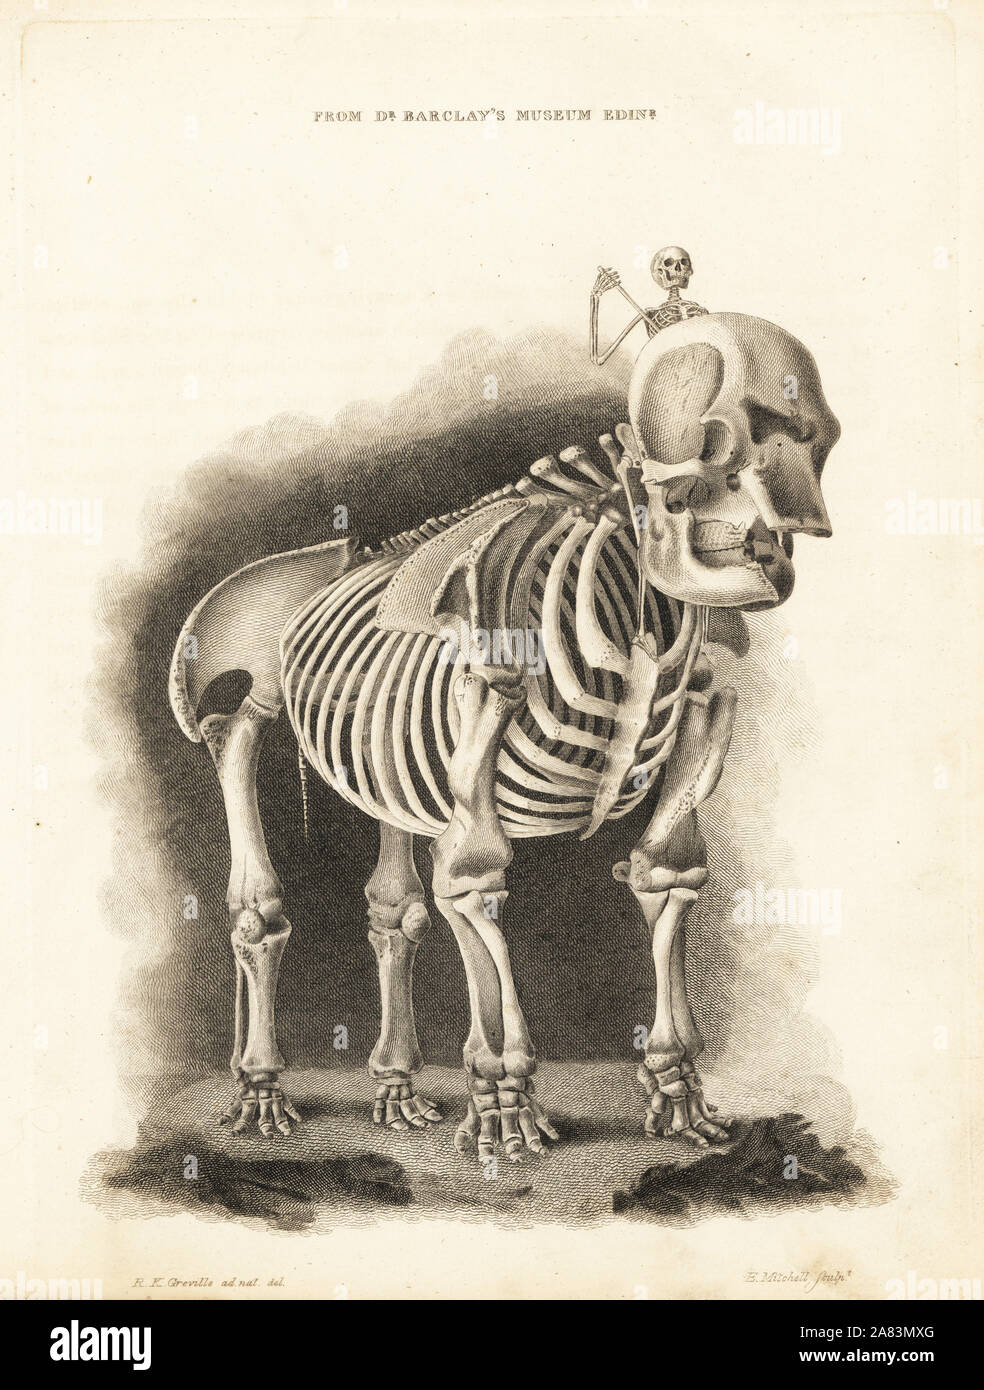 Skeleton of an elephant with human skeleton rider, from Dr. Barclay's Museum, Edinburgh. The specimen was assembled by Dr. George Ballingall, surgeon of the 33rd Regiment of Foot. Copperplate engraving by Edward Mitchell after an anatomical illustration by Robert Kaye Greville from John Barclay's A Series of Engravings of the Human Skeleton, MacLachlan and Stewart, Edinburgh, 1824. Stock Photo